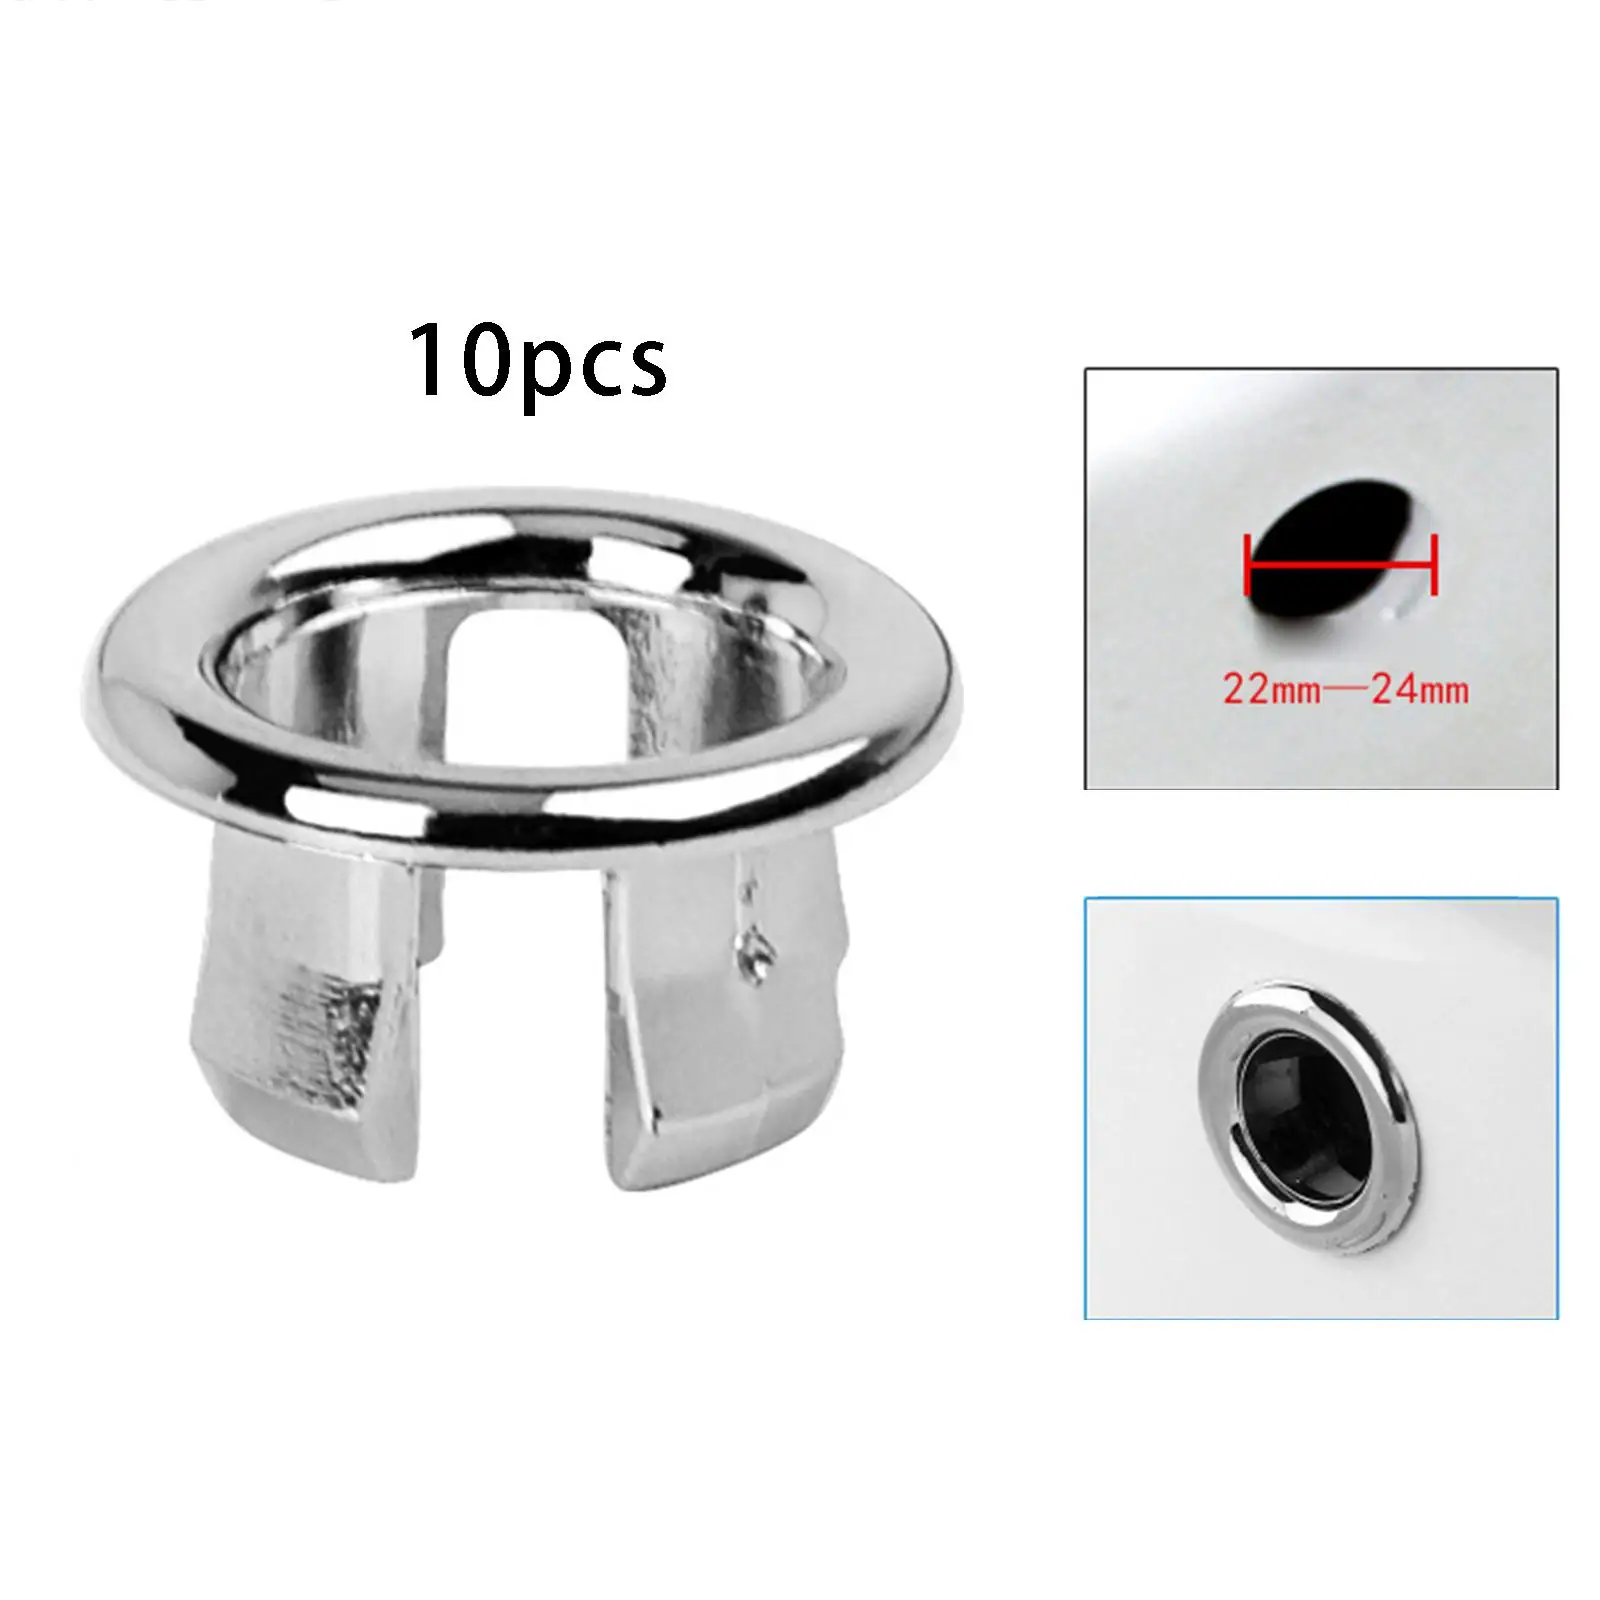 10x Round Basin Cover Sink Hole Cover Wash Basin Overflow Ring Overflow Trim Ring for Kitchen Bathroom Bathtub